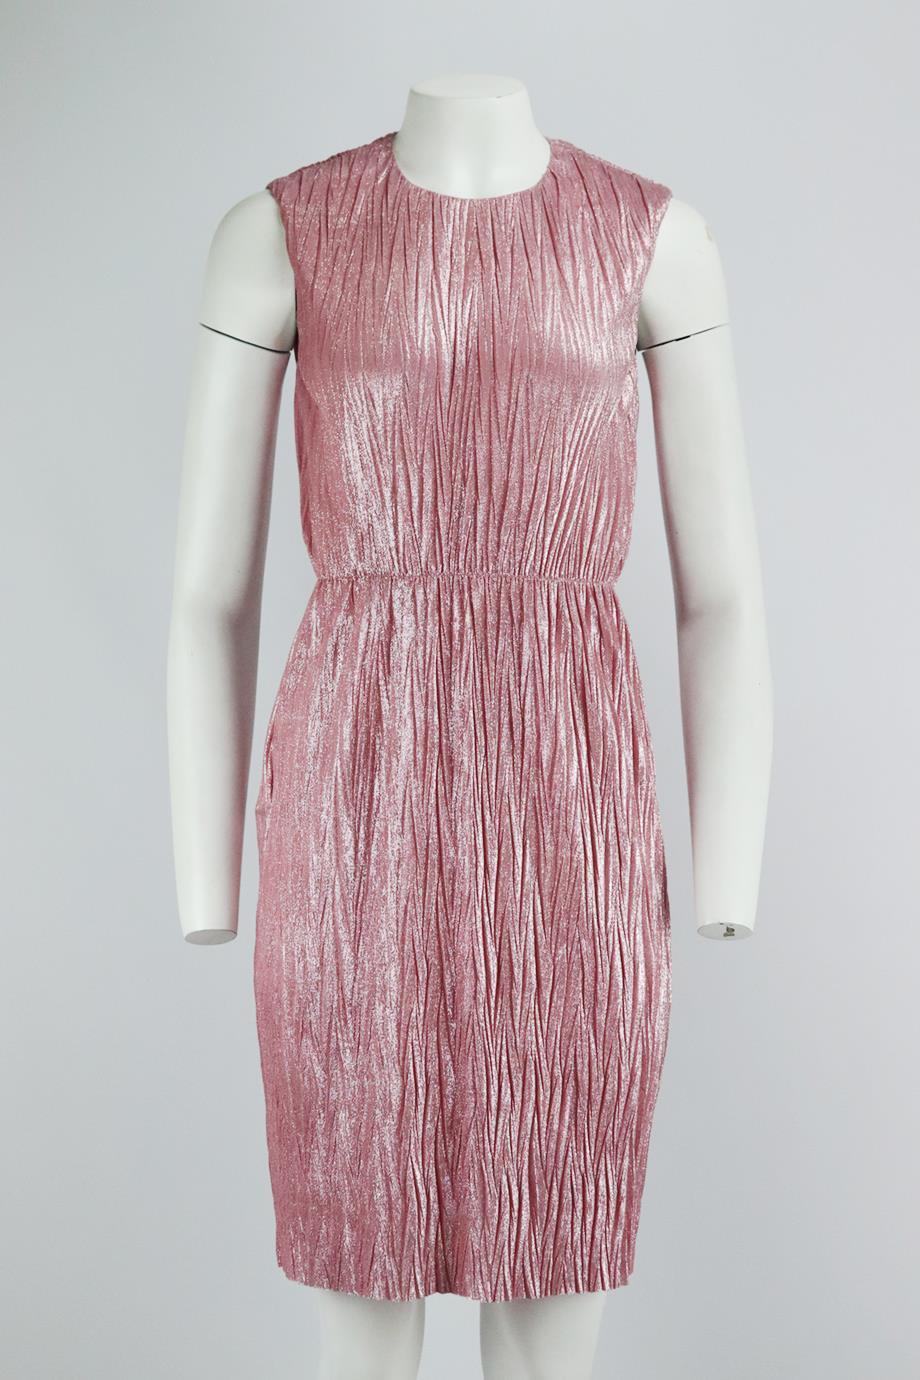 Gucci metallic plissé lame mini dress. Pink. Sleeveless, crewneck. Zip fastening at back. 38% Polyester, 37% rayon, 27% nylon. Size: Small (UK 8, US 4, FR 36, IT 40). Bust: 35 in. Waist: 26 in. Hips: 42 in. Length: 38.5 in. Very good condition -